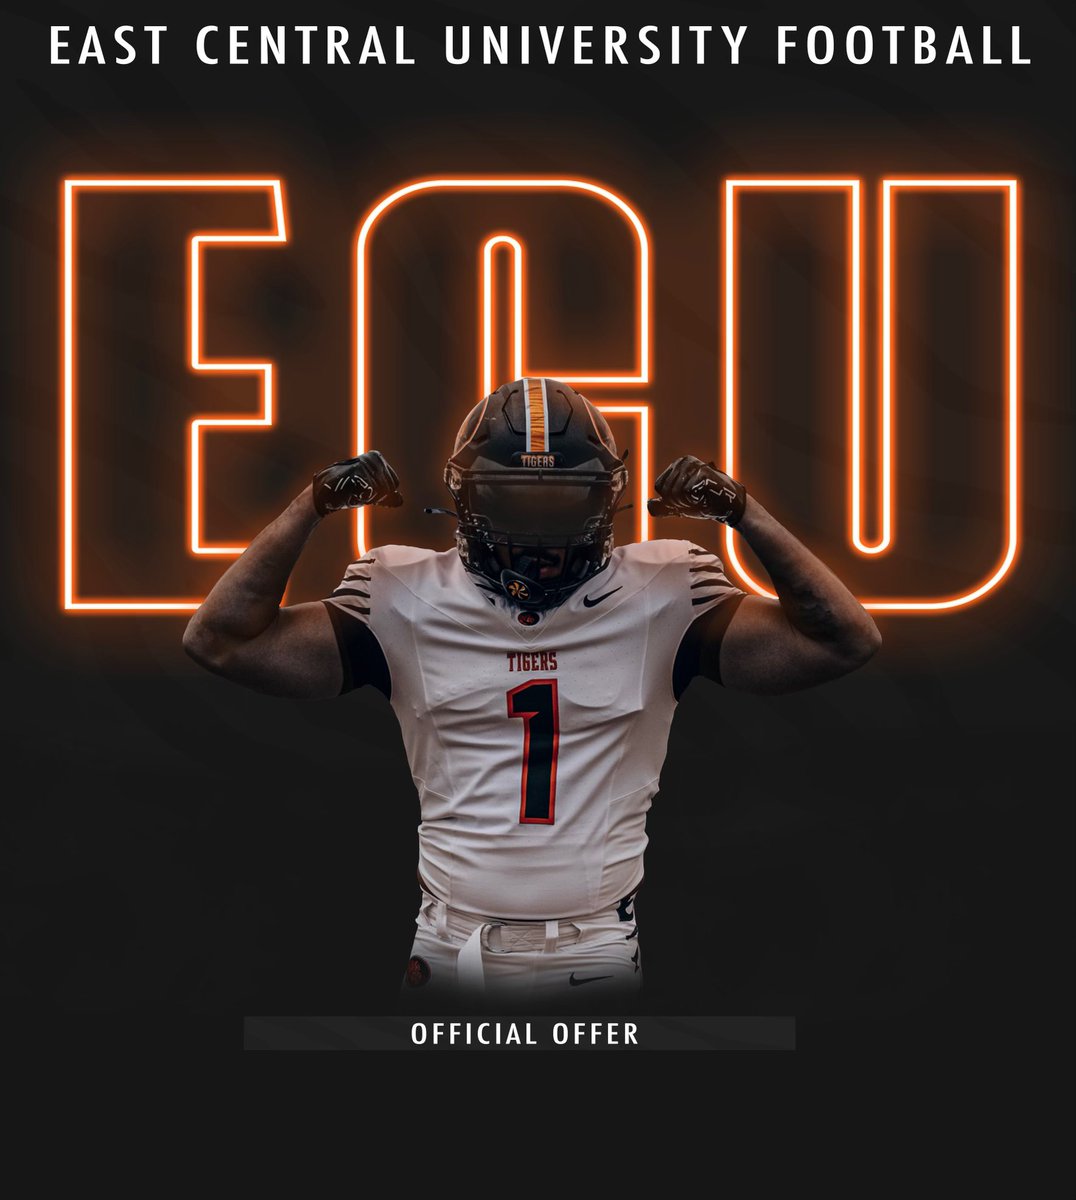 #AGTG After a great conversation with @CoachIngramECU I’m blessed to announce I have received my 1st offer to further my athletic career at @ECUTigersFB !!! @collinsville_fb @Coach_TDaniels @littlehead72 #trainingwithchief